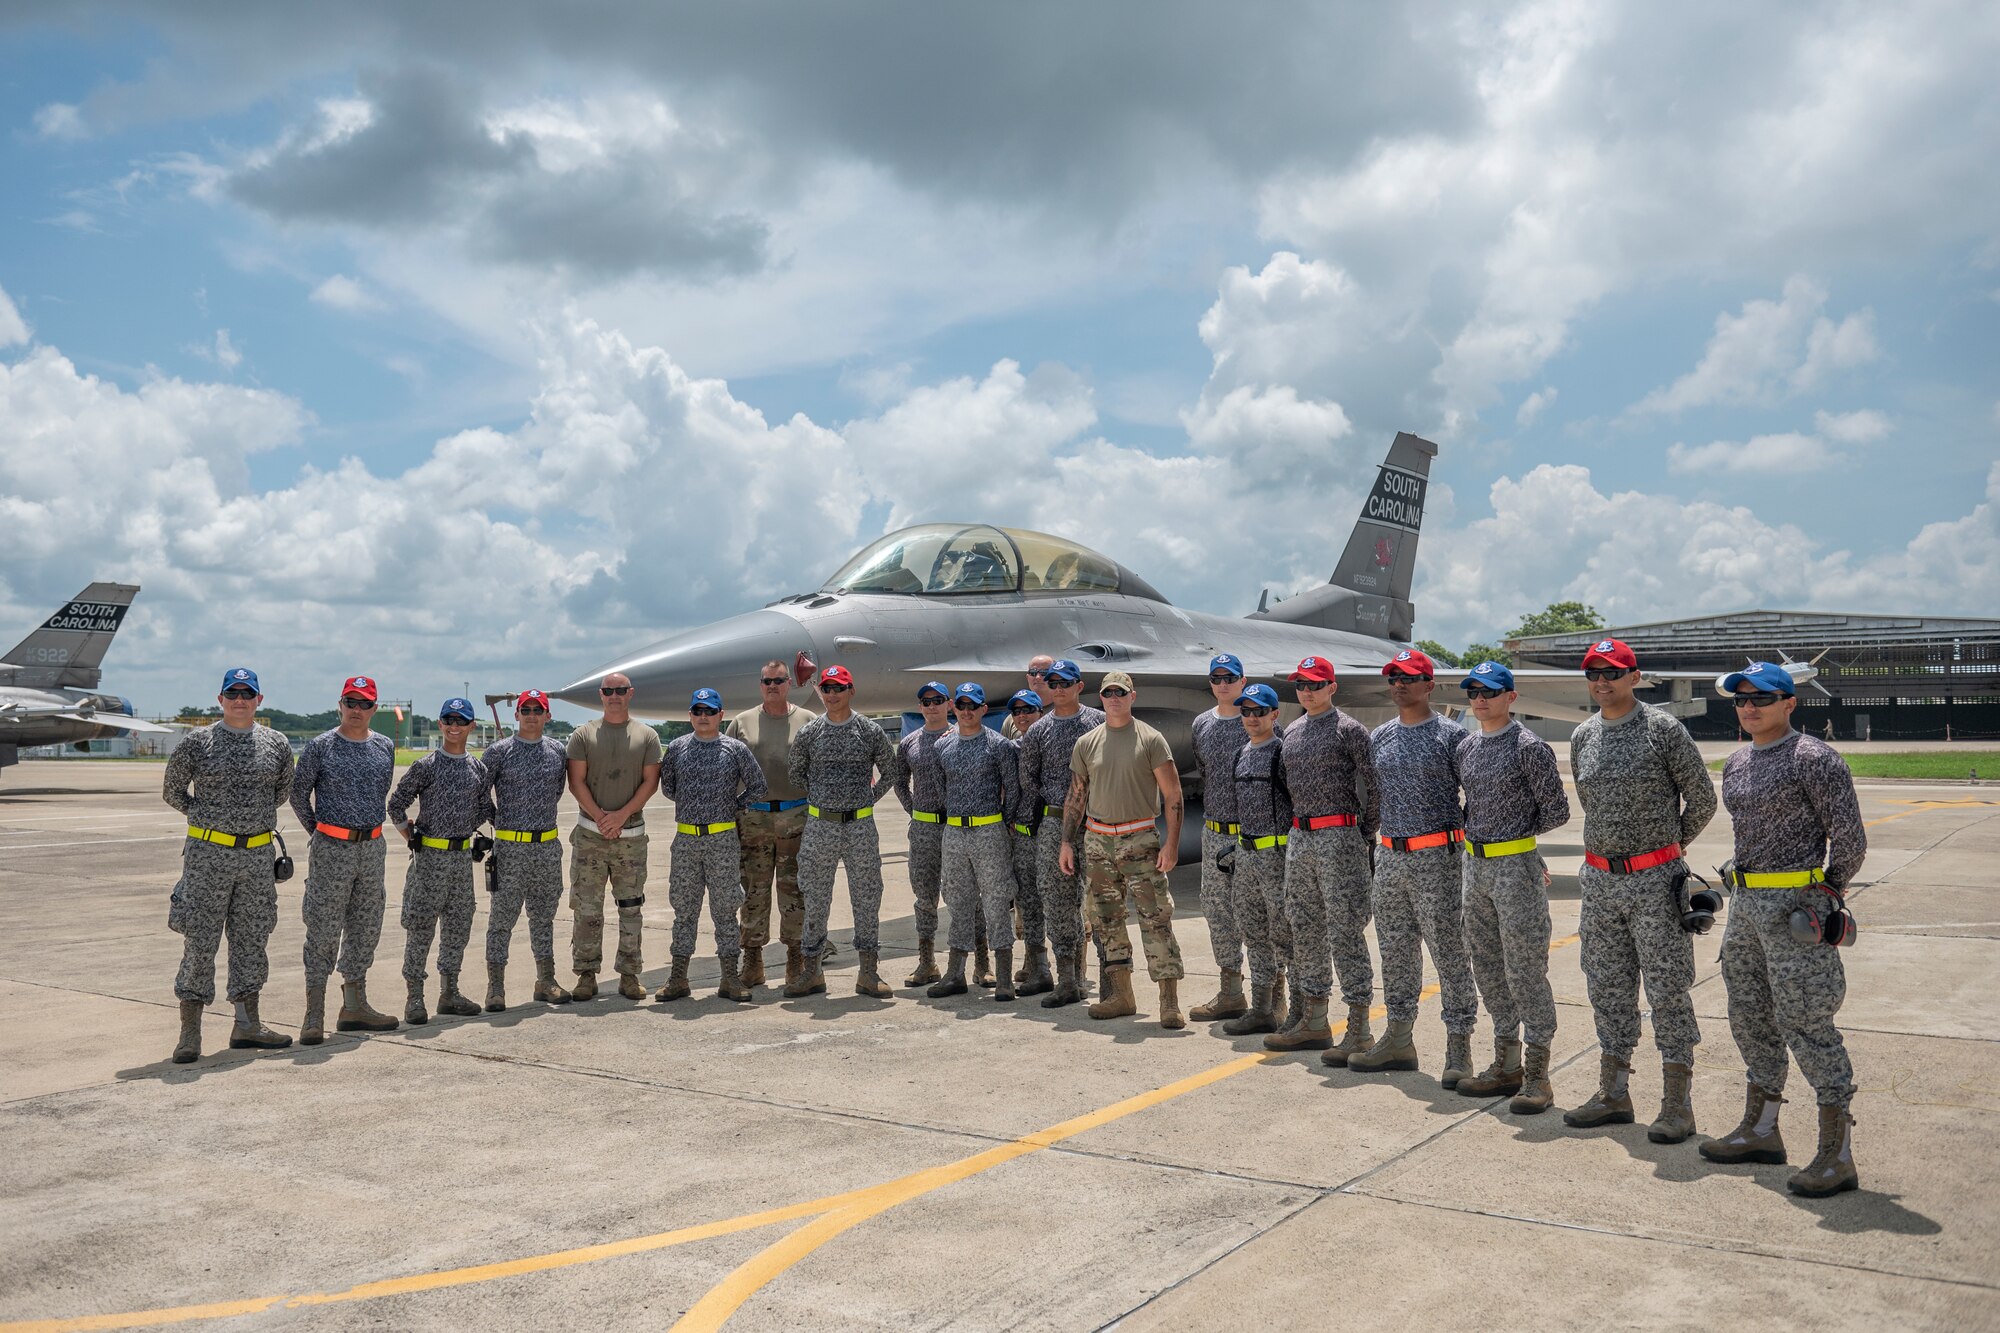 Airmen and F-16 fighter jets from the South Carolina Air National Guard’s 169th Fighter Wing and members of the Colombian Air Force pause for a photo Aug. 30, 2022, during the two-week Relampago VII exercise in Barranquilla, Colombia. South Carolina and Colombia are partners under the Department of Defense National Guard Bureau State Partnership Program.